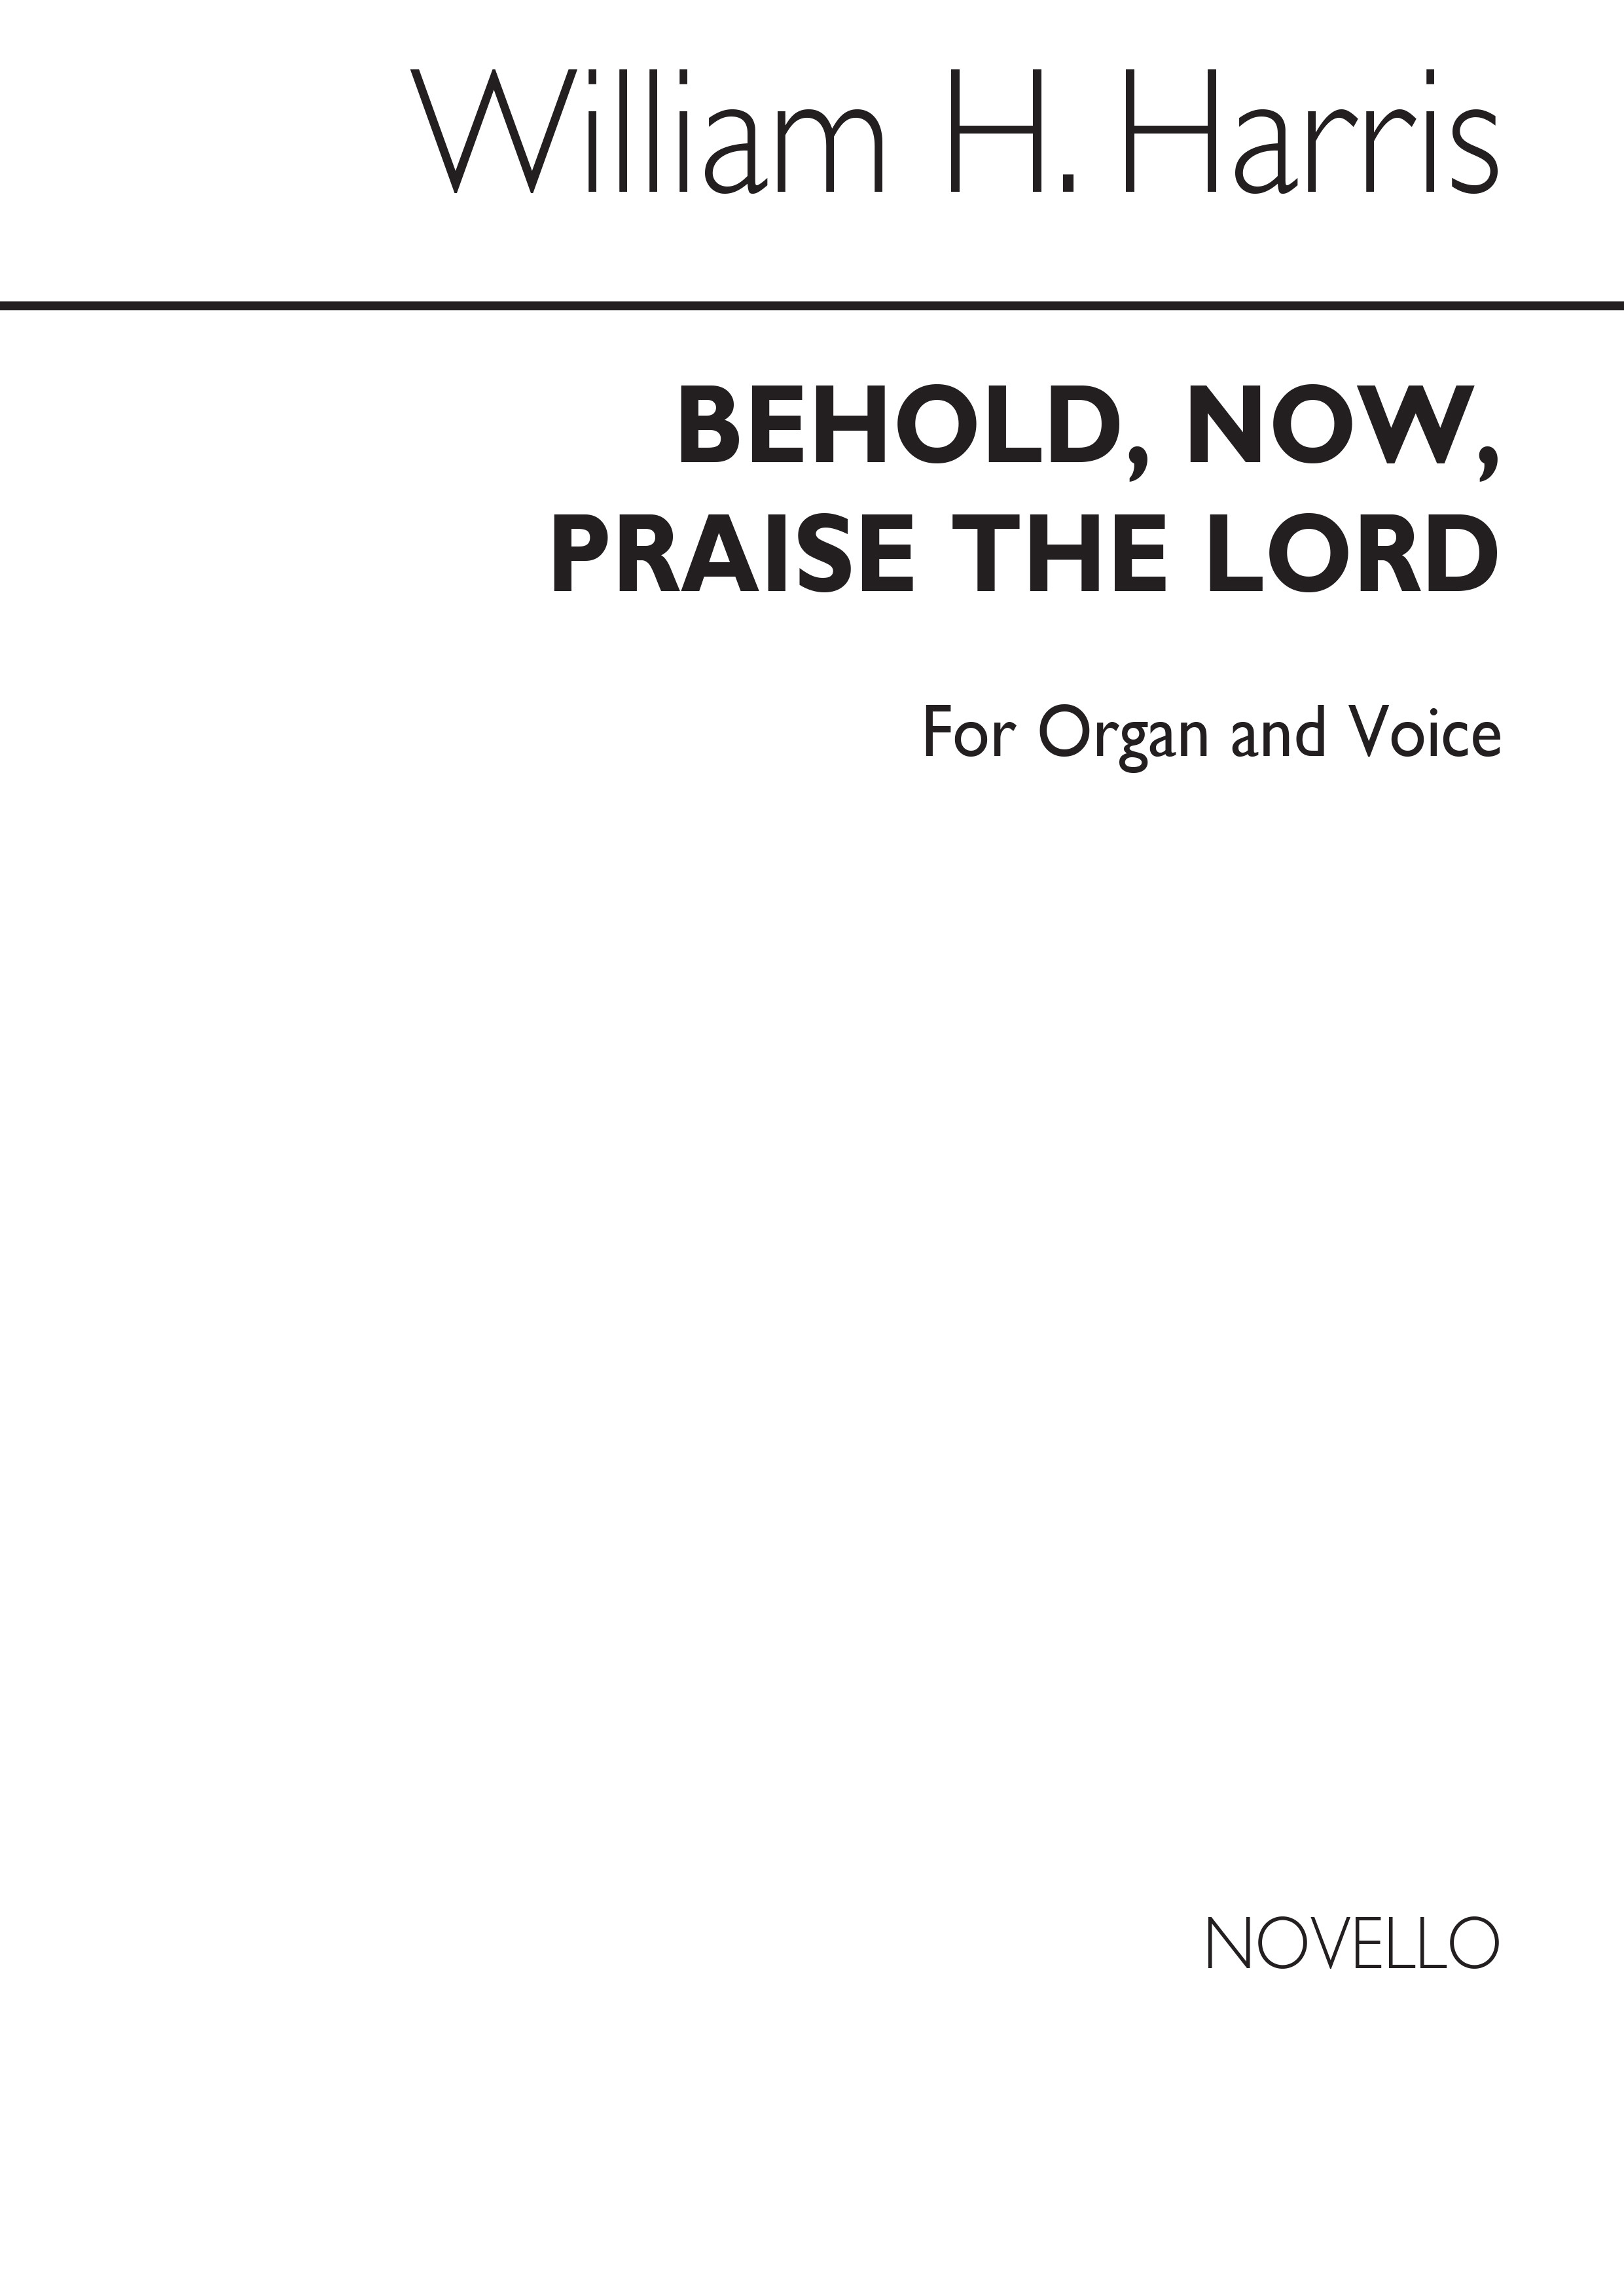 Sir William Henry Harris: Behold Now Praise The Lord